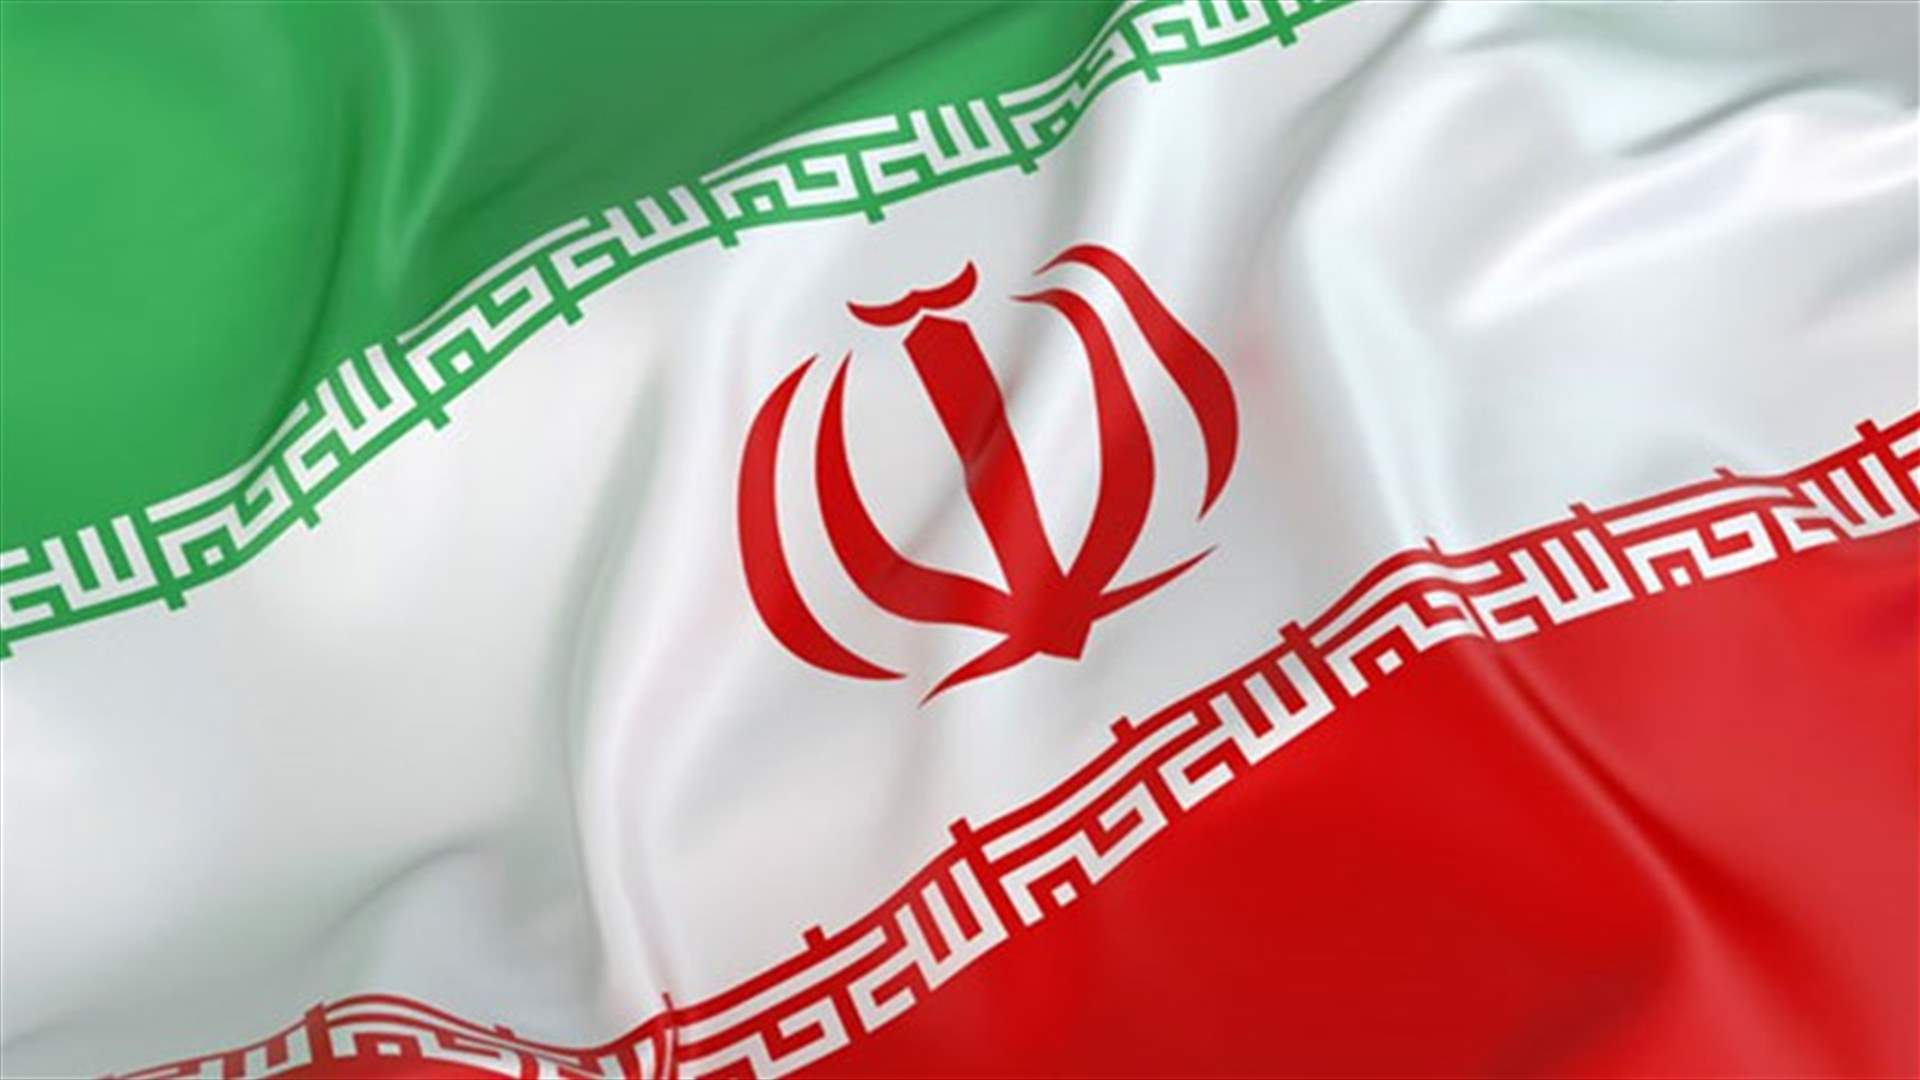 Senior Iranian official summoned to court for allegedly spreading lies